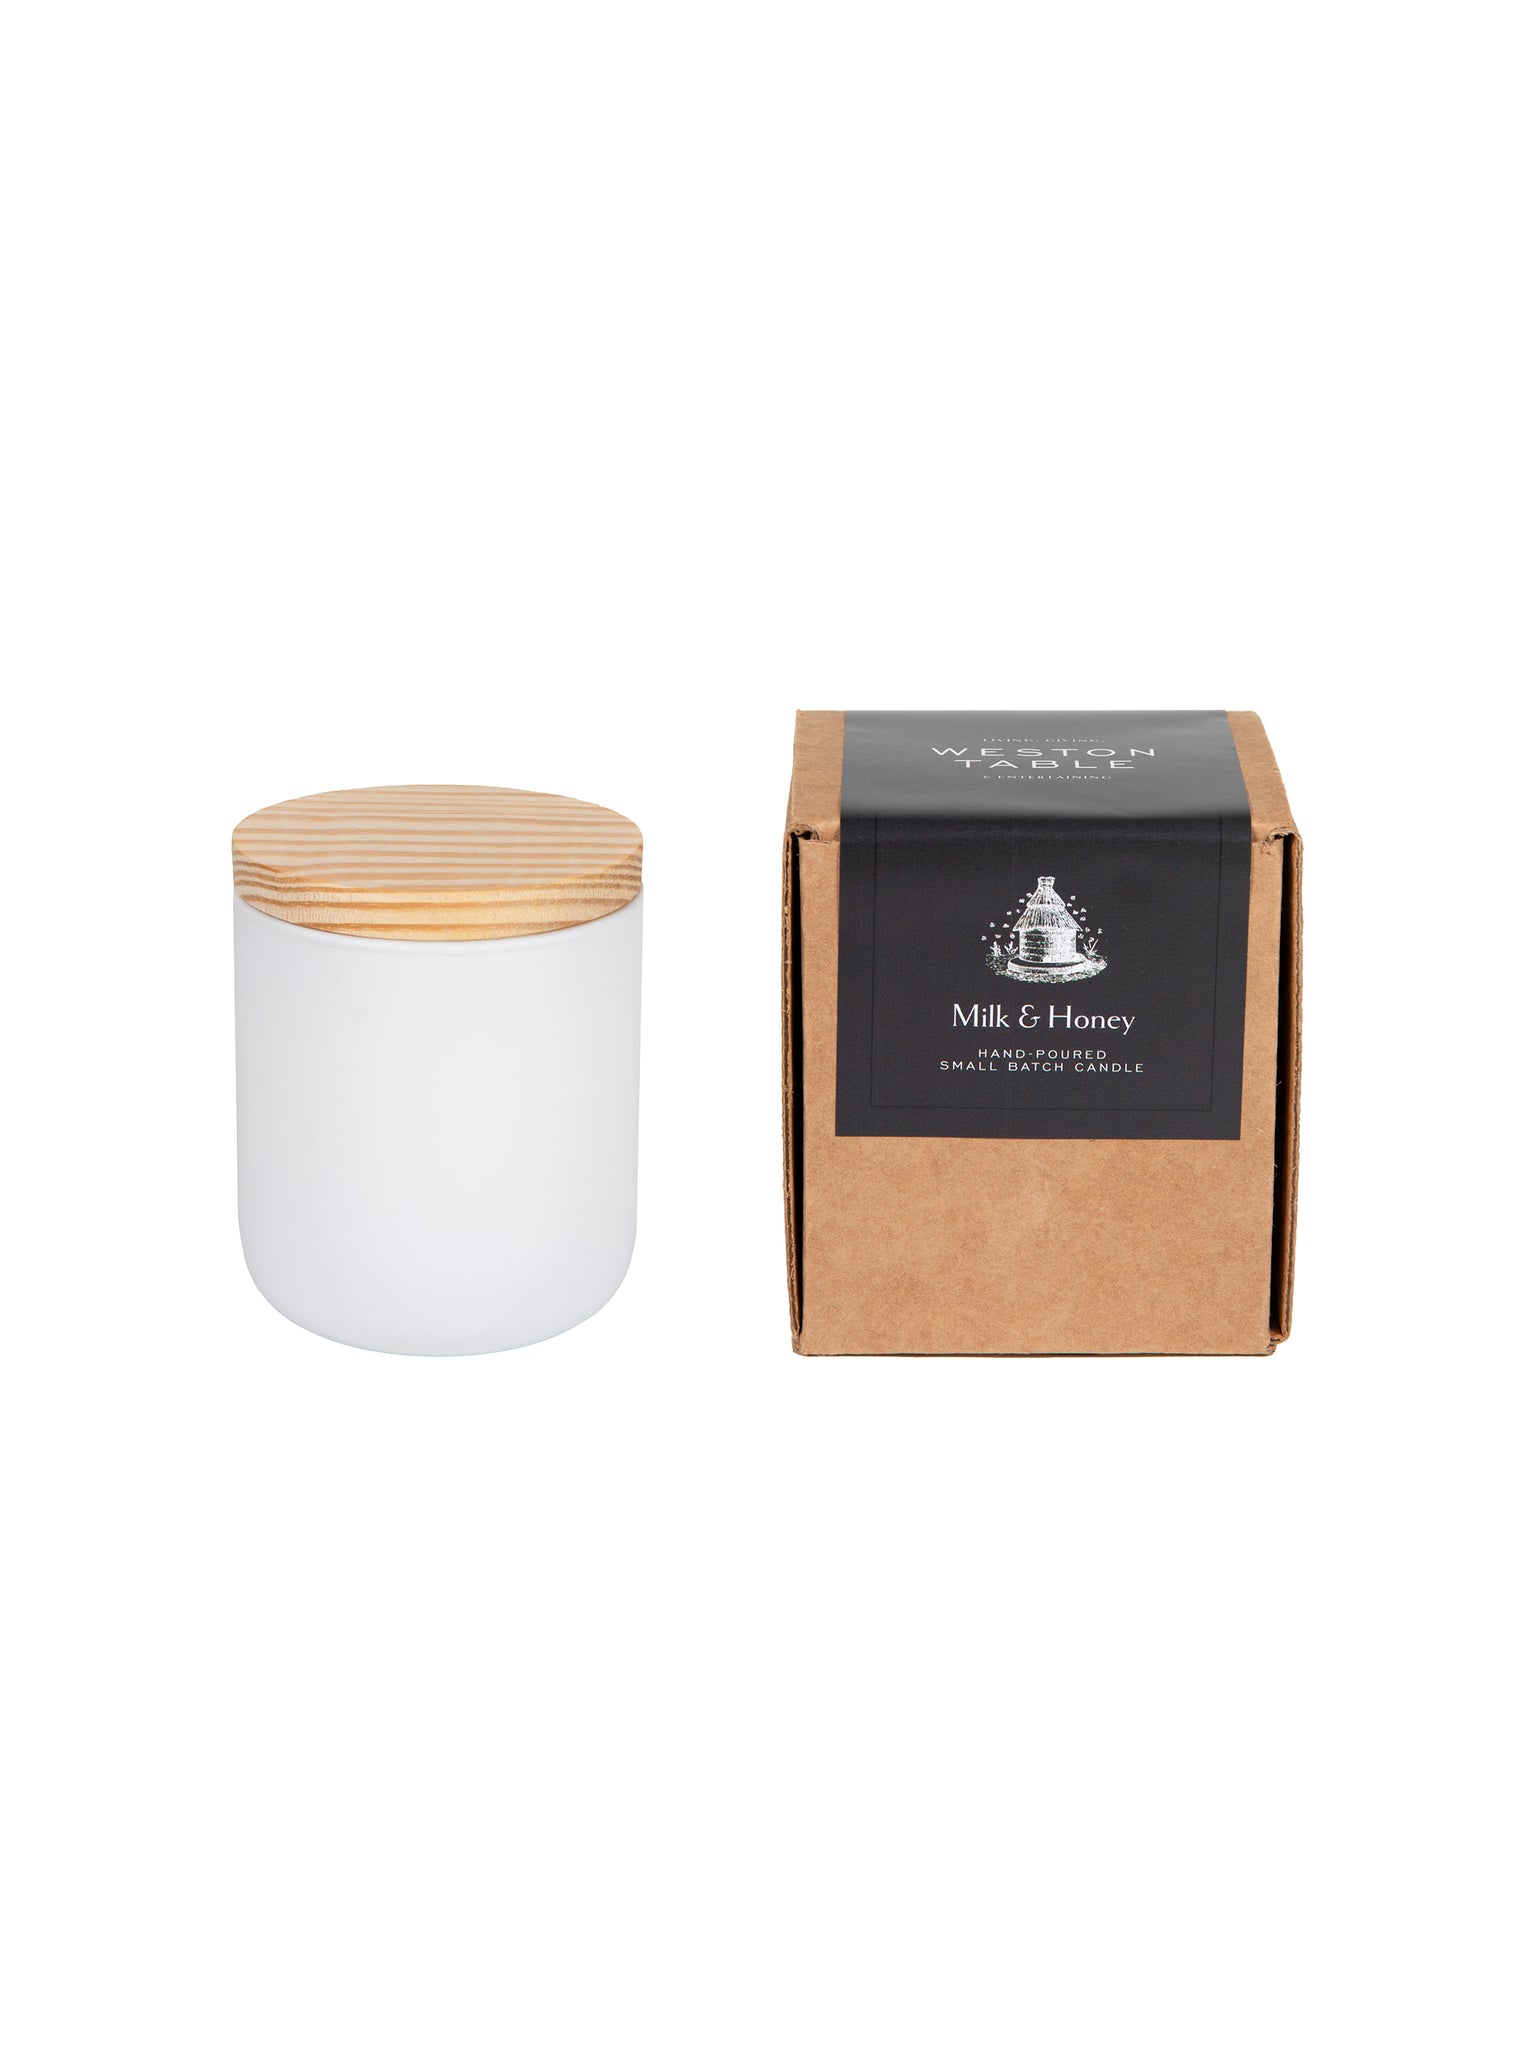 WT Milk and Honey Candle Weston Table 